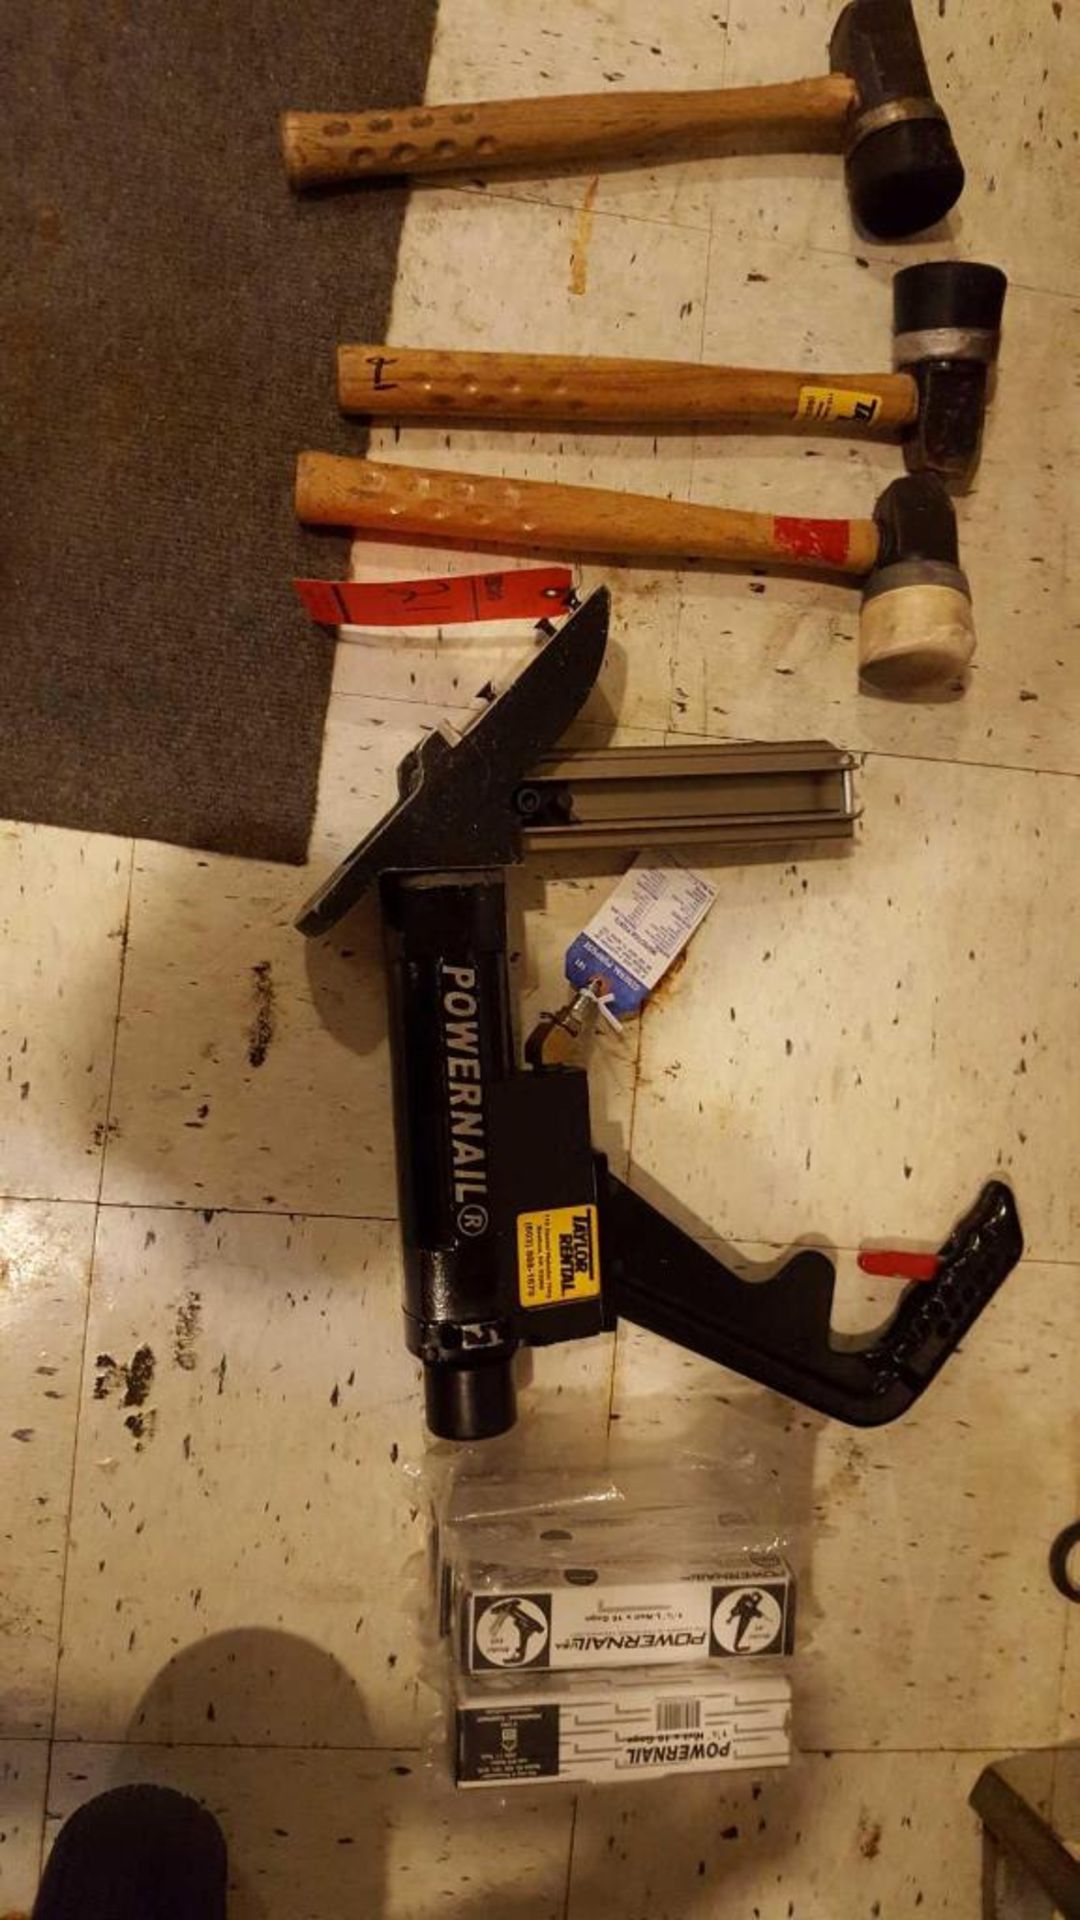 Powernail floor nailer model 445, with (3) hammers, and (8) boxes of nails